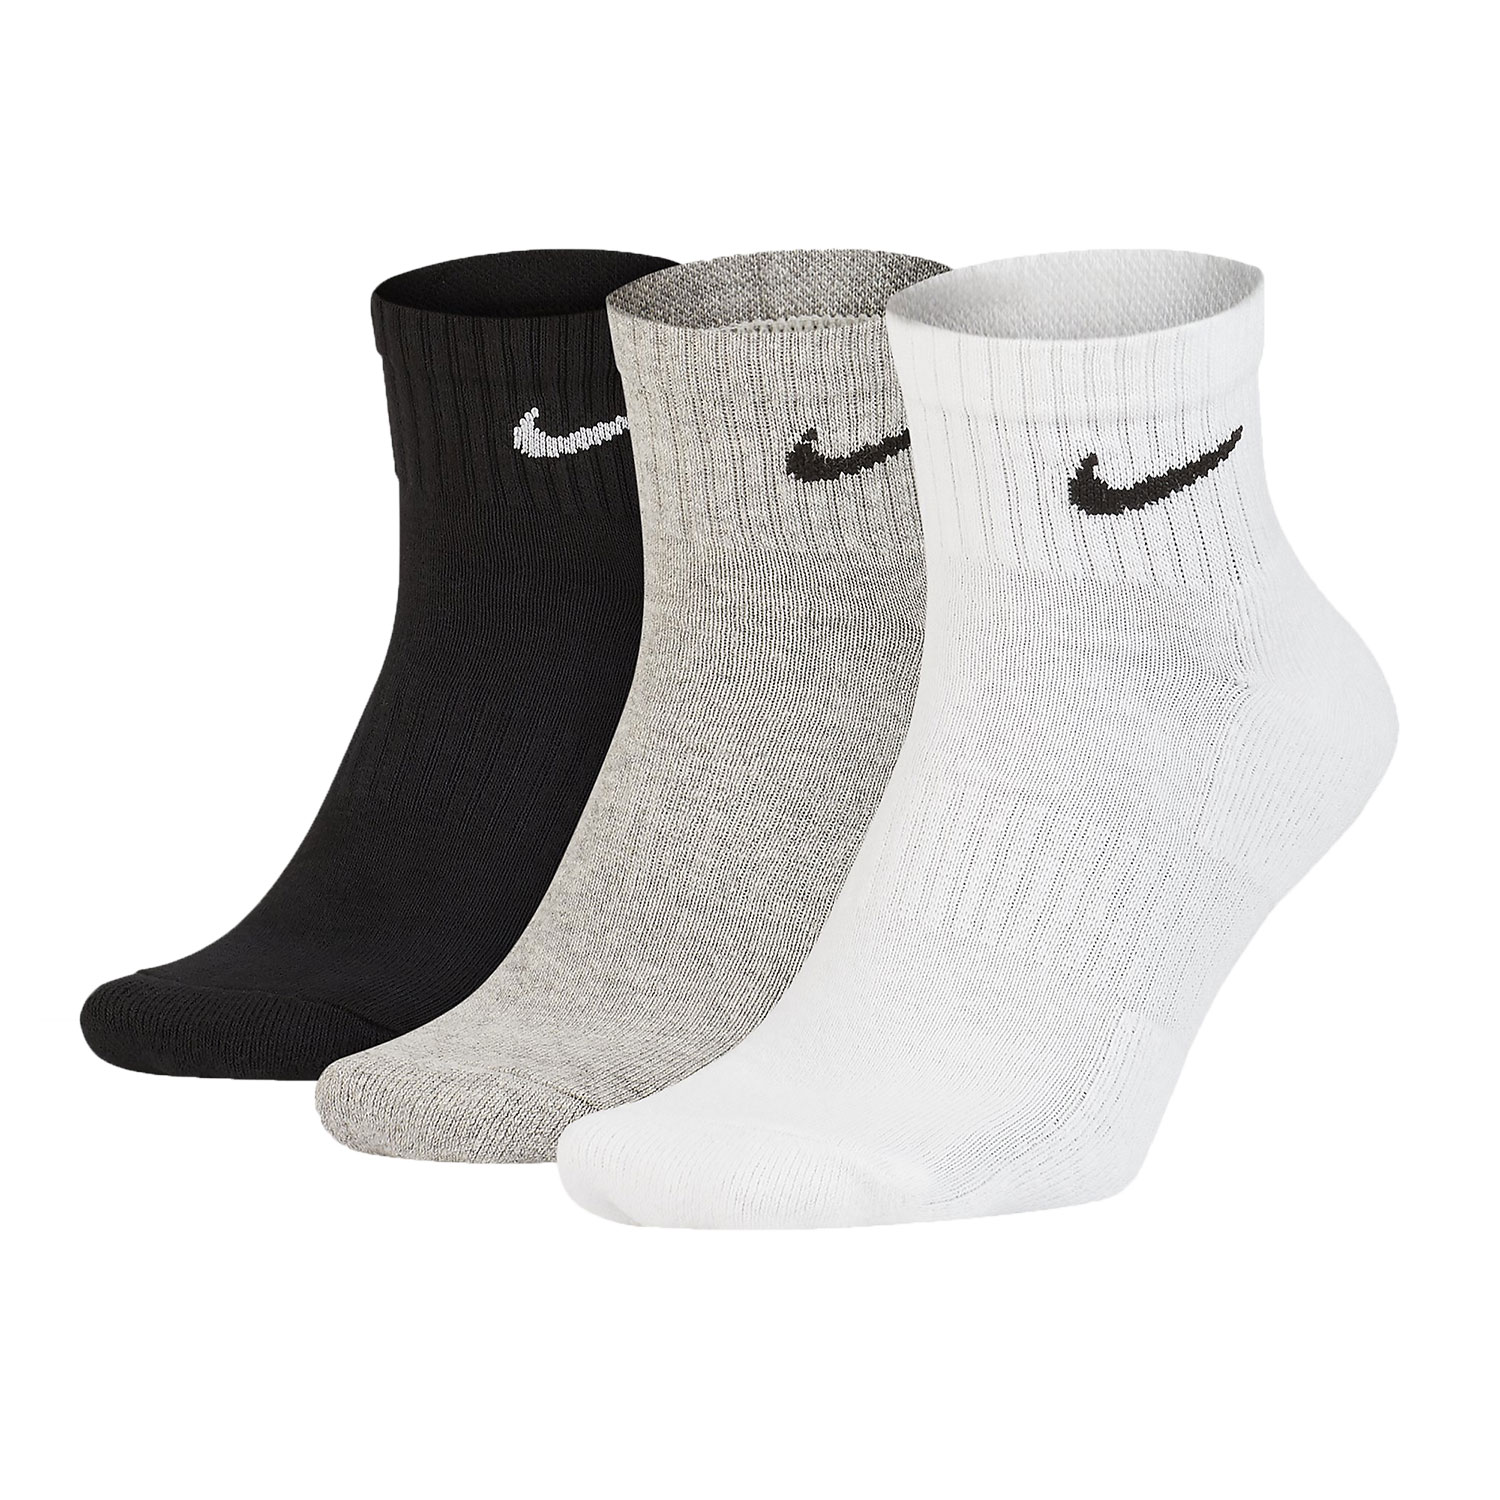 Nike Everyday Cushion Ankle Calze Tennis Uomo - Multi Color